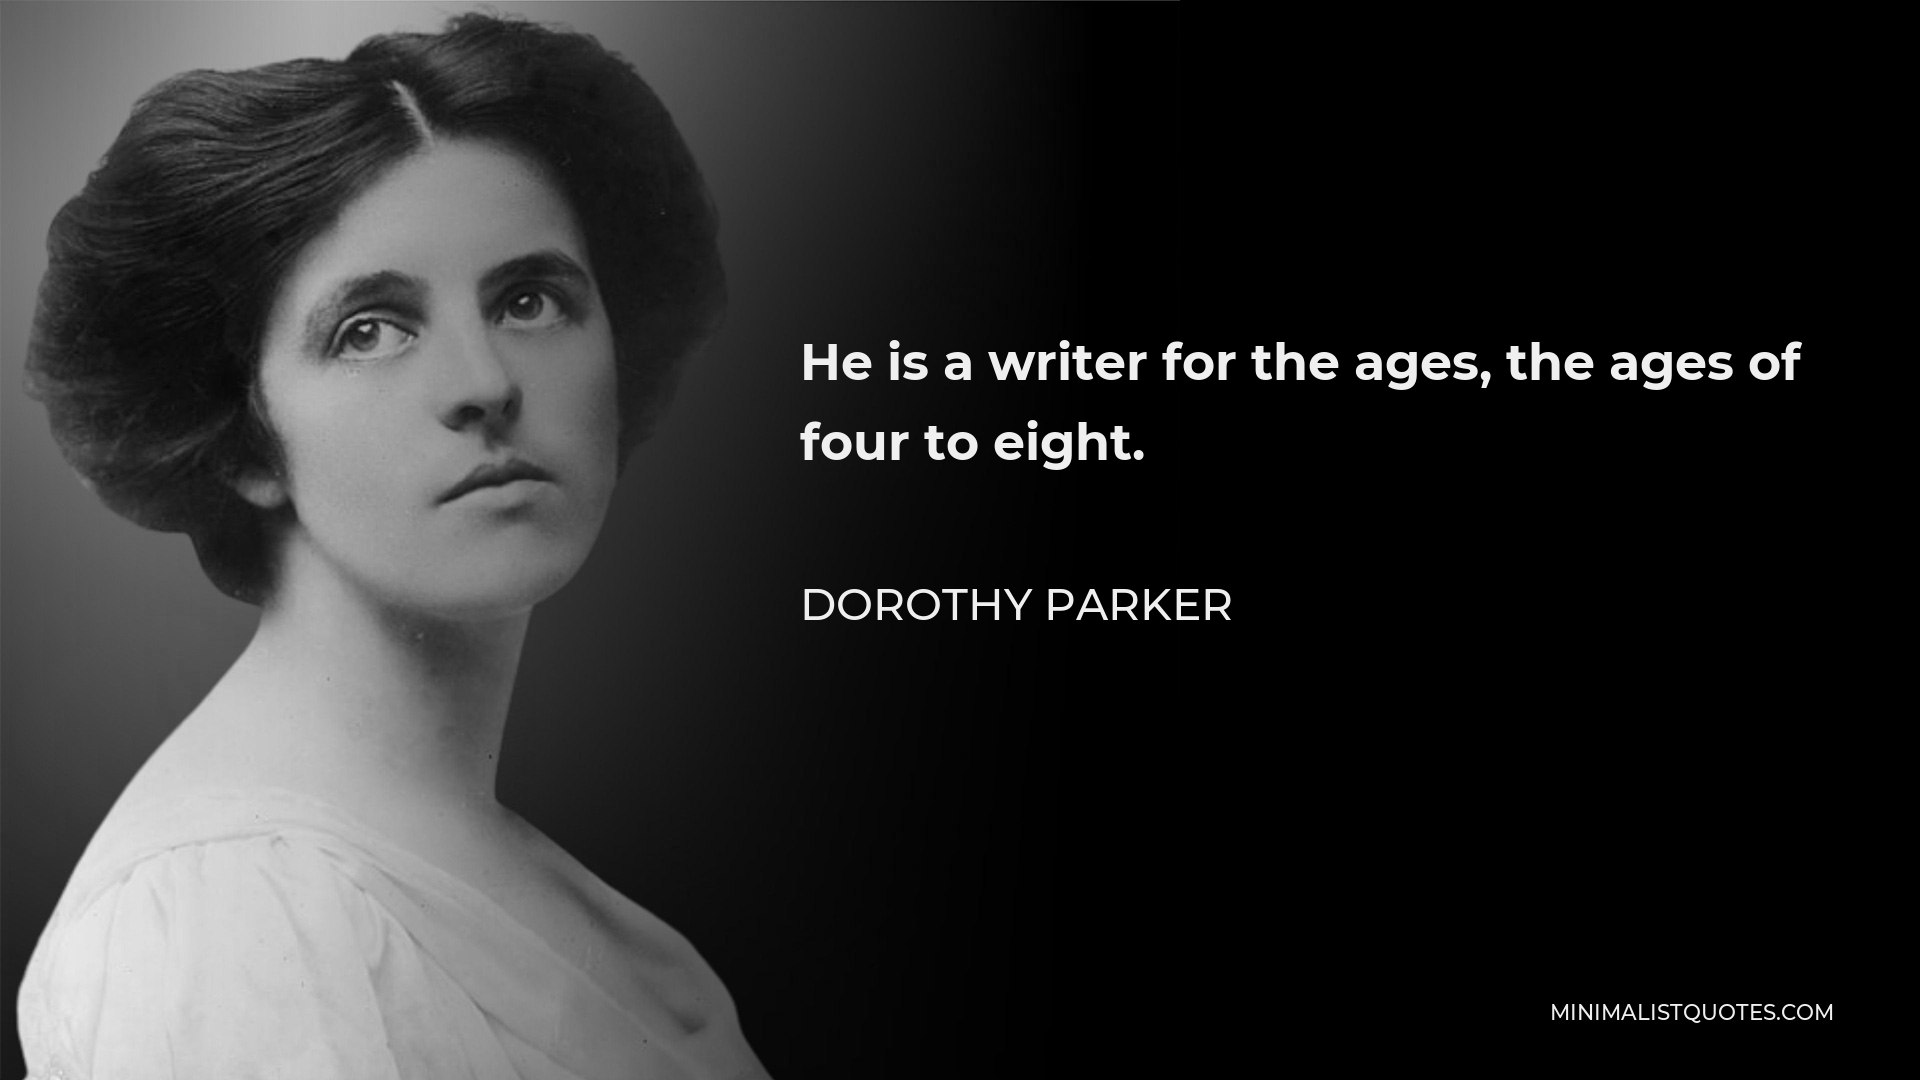 Dorothy Parker Quote - He is a writer for the ages, the ages of four to eight.